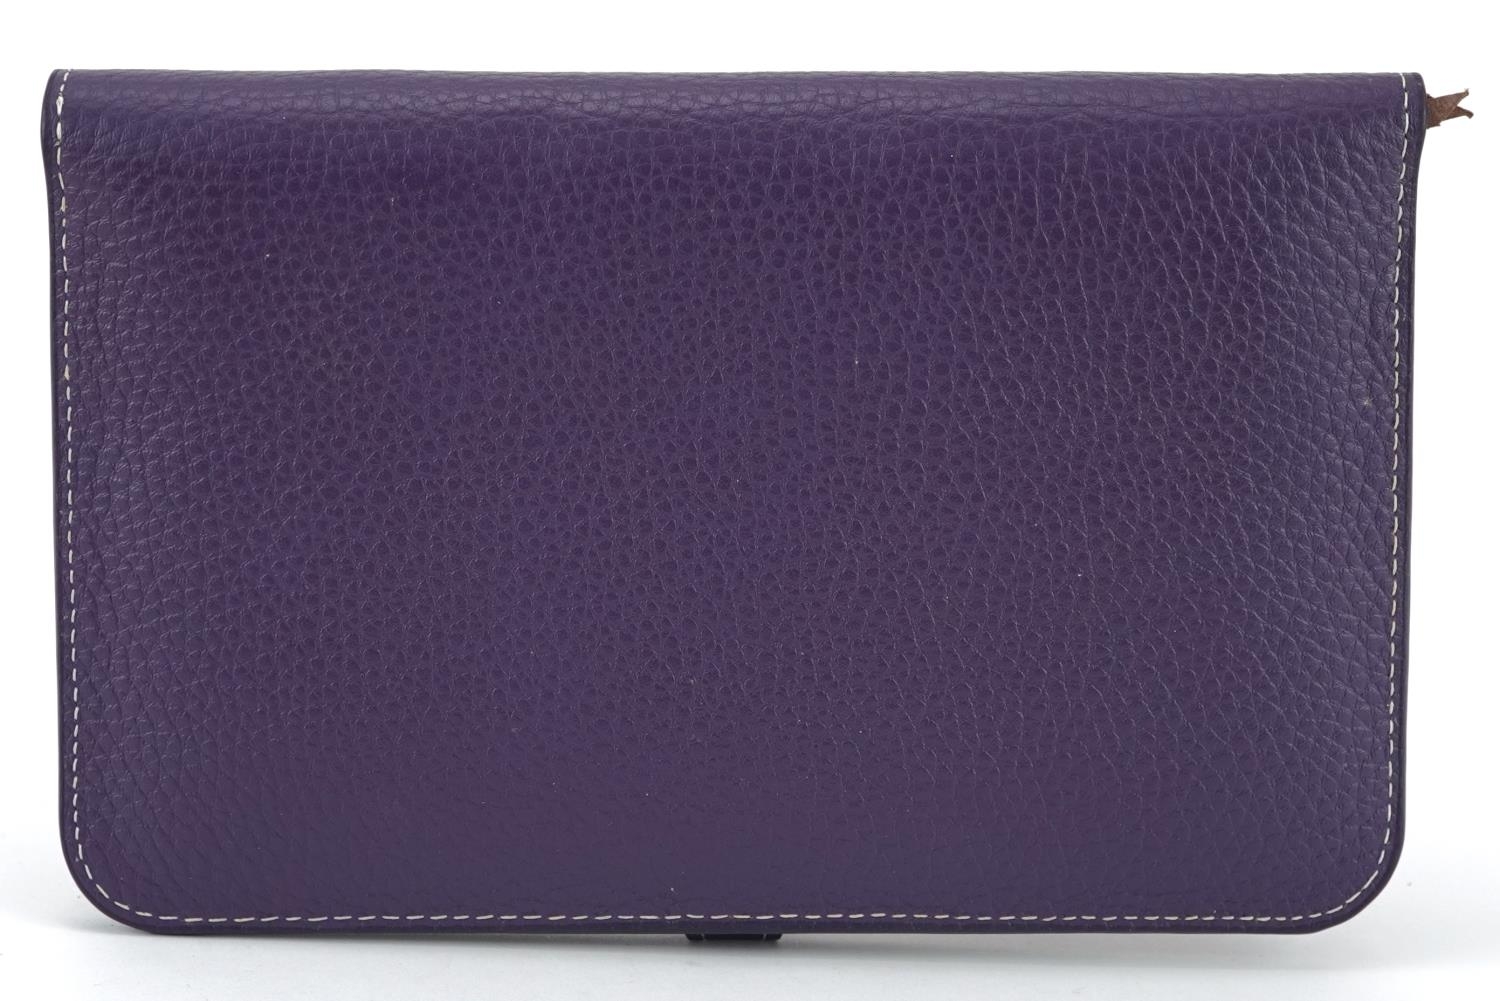 Hermes, French purple leather clutch purse with cardholder, dust bag and box, the clutch bag 19. - Image 6 of 6